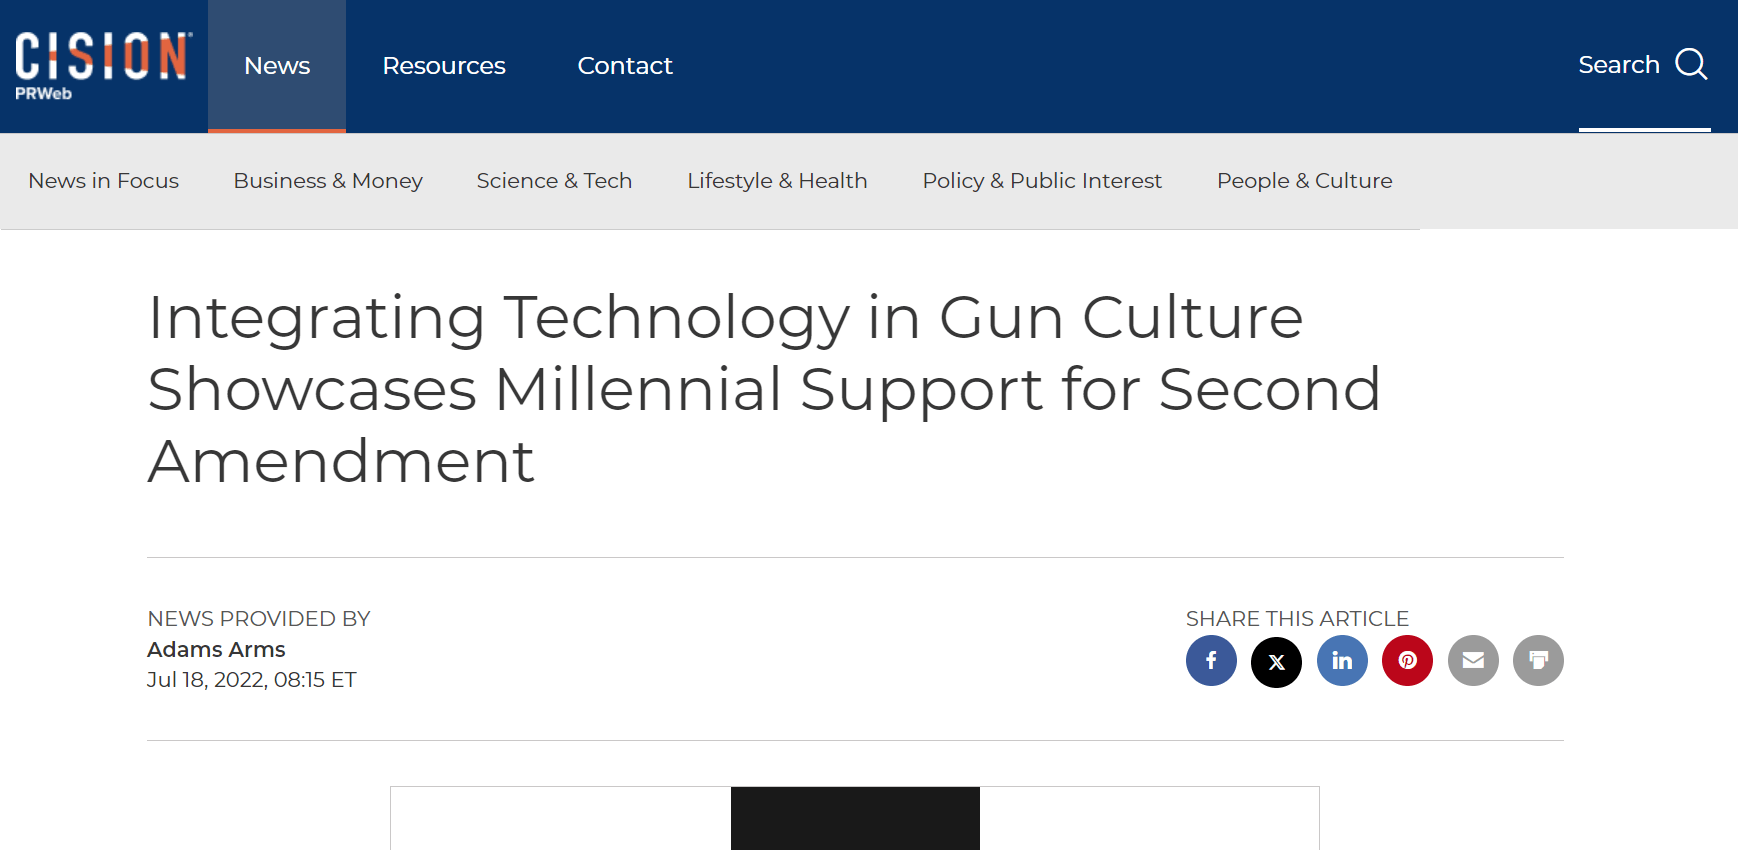 Cision News Article: Integrating Technology in Gun Culture Showcases Millennial Support for Second Amendment